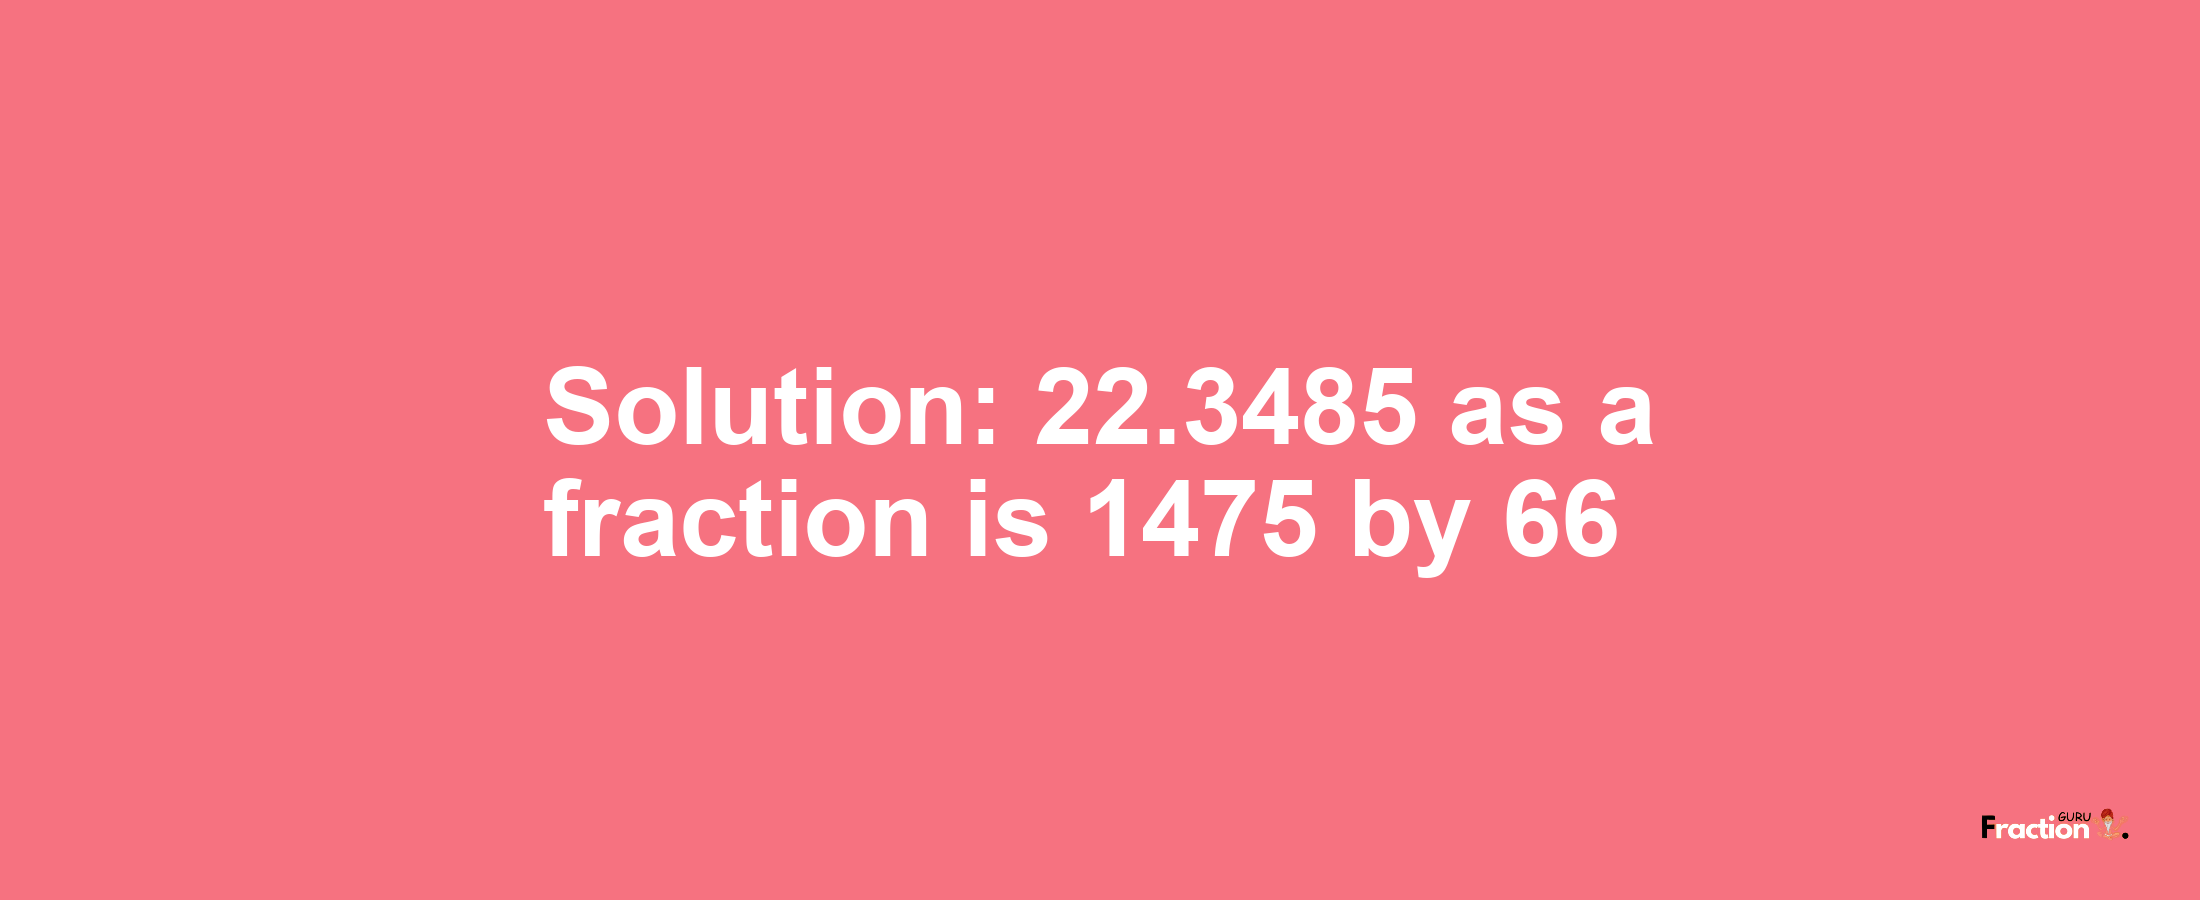 Solution:22.3485 as a fraction is 1475/66